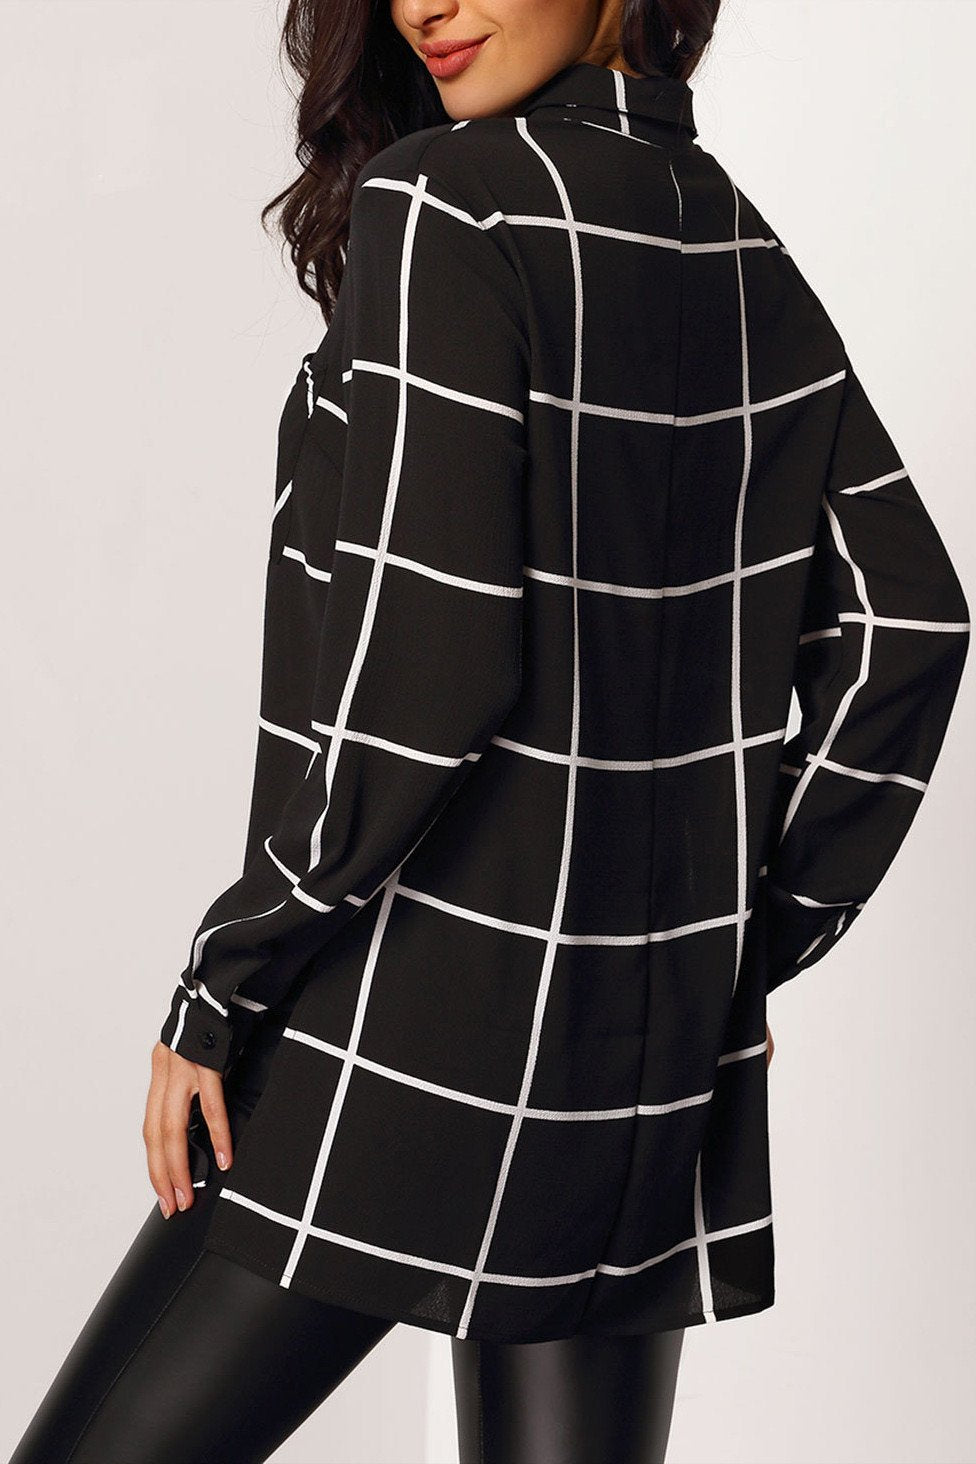 V-neck Plaid Button Long Sleeves Blouse